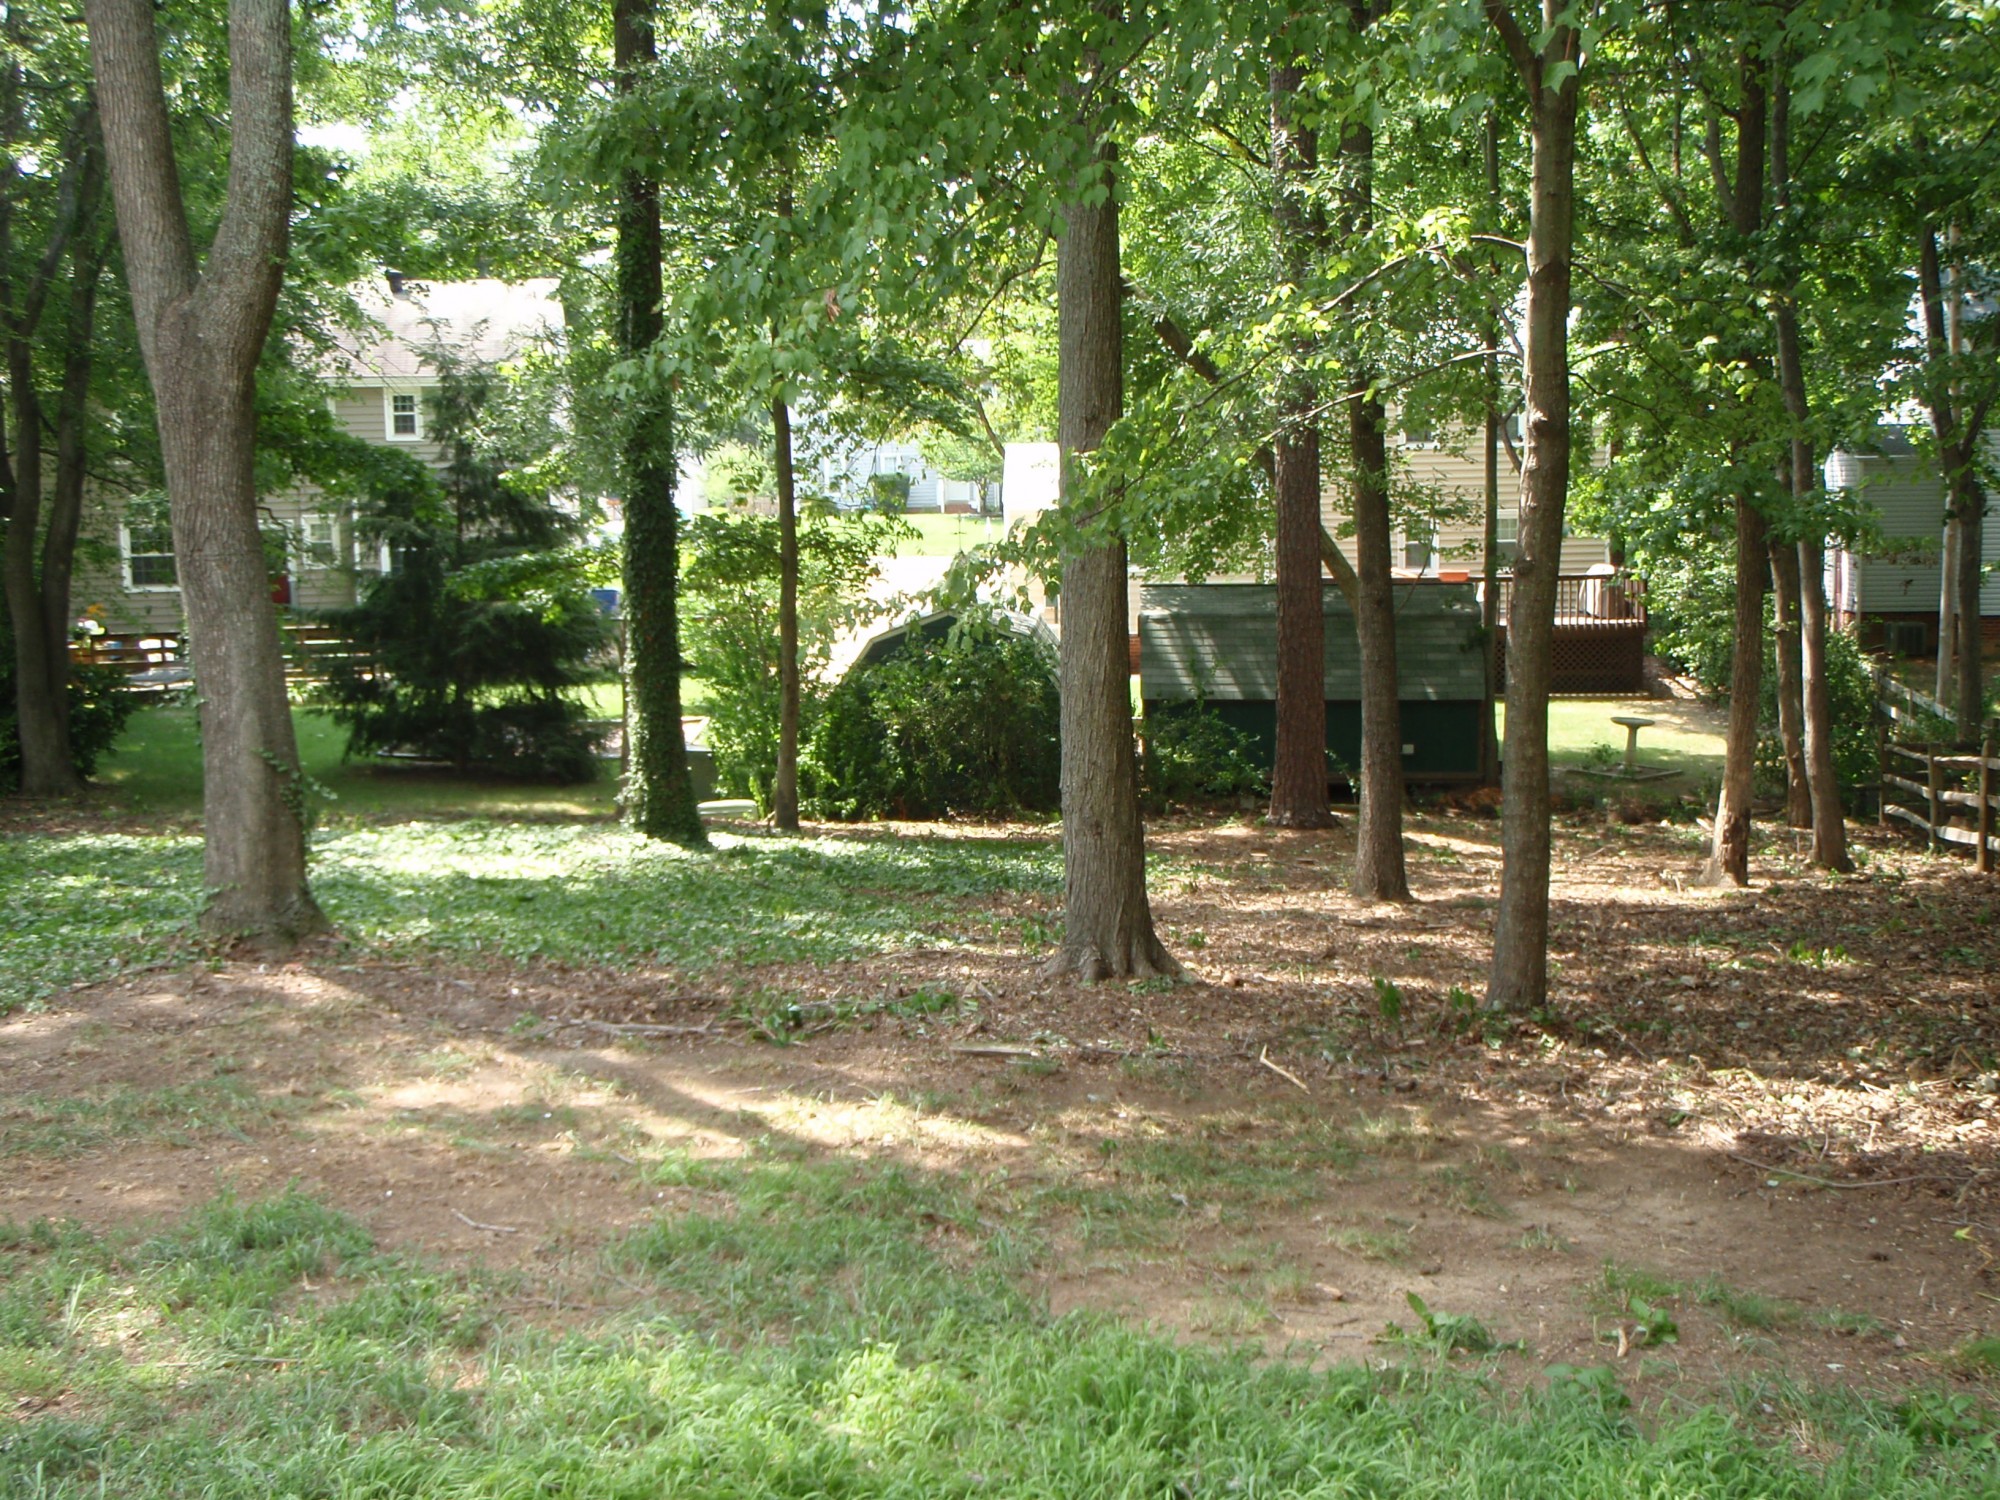 backyard-brush-removal-natural-area-maintained ...